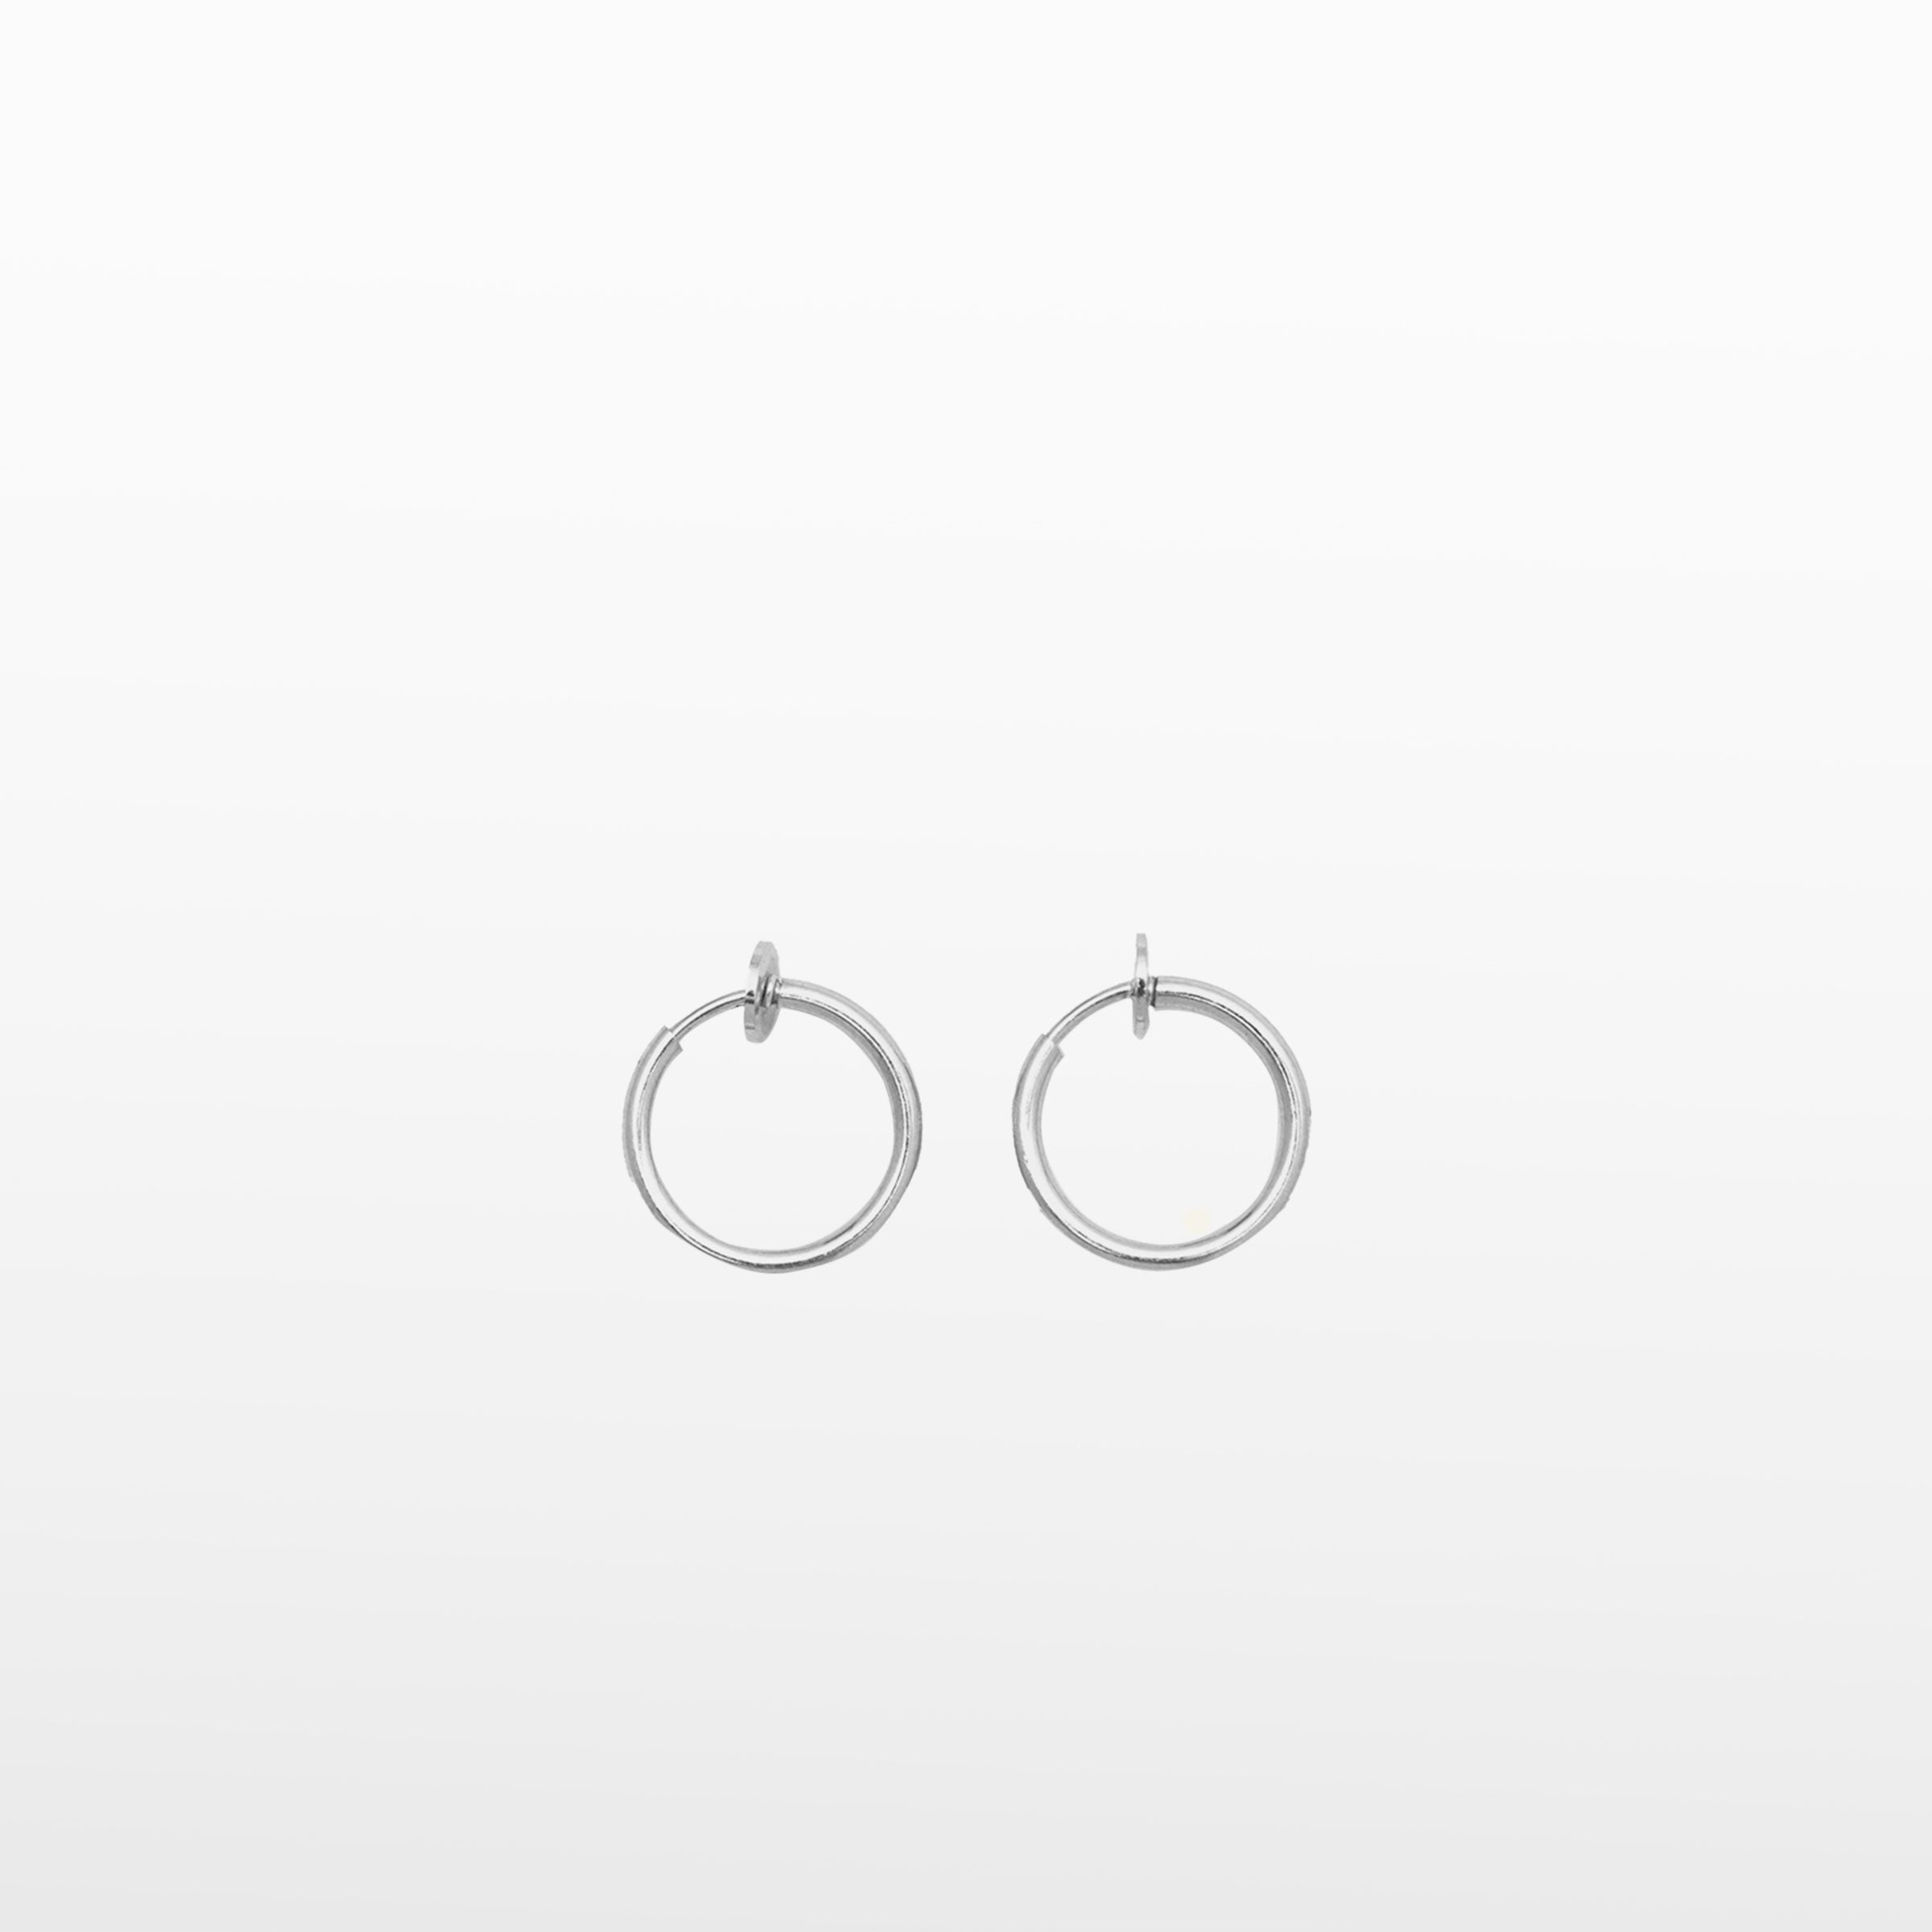 Image of the Thin Hoop Clip On Earrings in Silver feature an adjustable sliding spring closure, making them an ideal option for those with small or thin ear lobes. The secure hold strength and adjustable closure offer up to 4 hours of comfortable wear, ensuring a perfect fit no matter the ear thickness. Crafted from stainless steel, each earring is sold as part of a single pair.